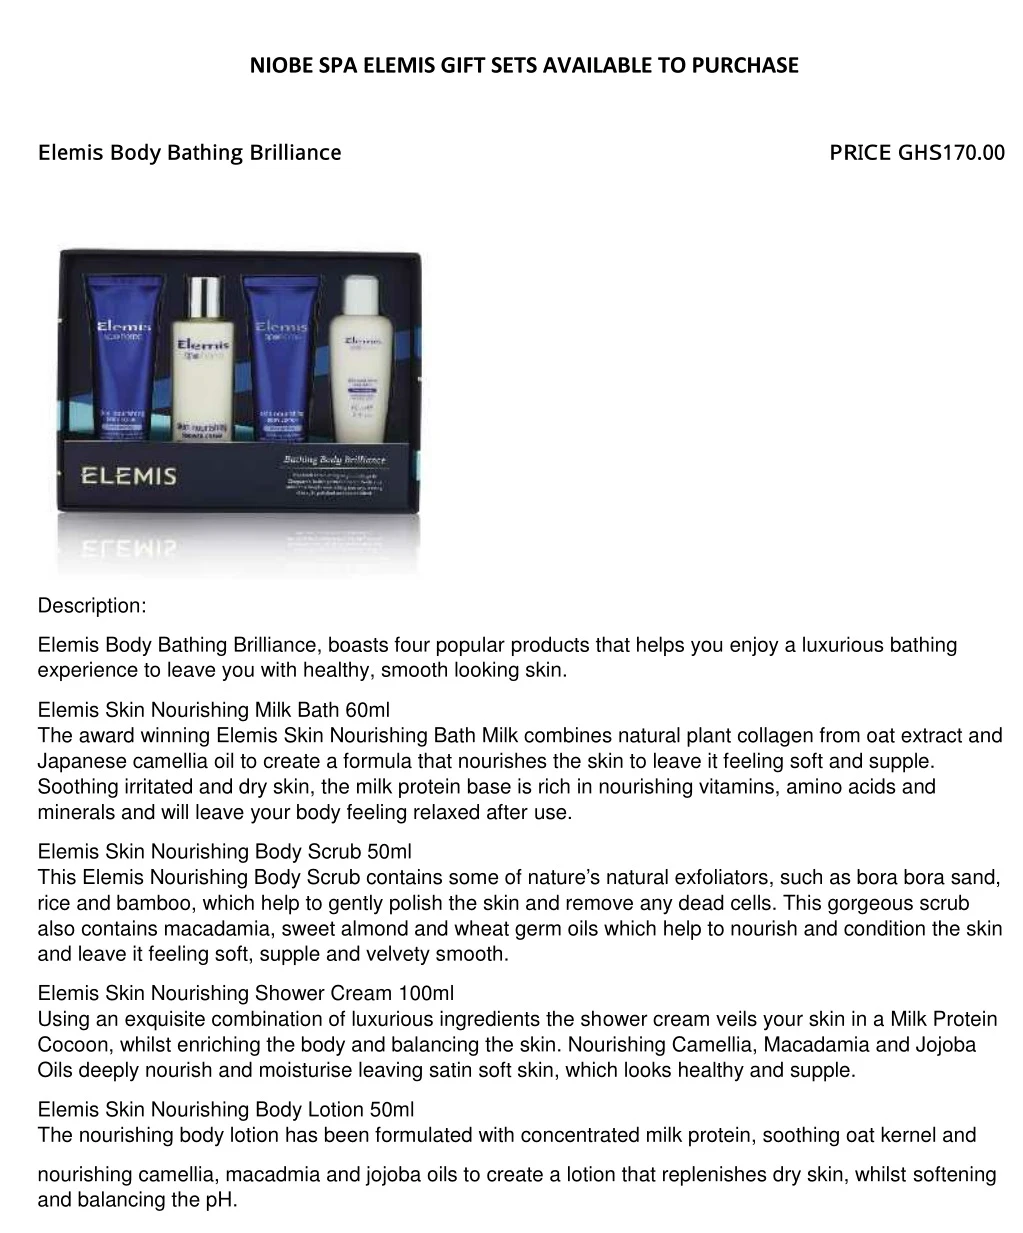 niobe spa elemis gift sets available to purchase